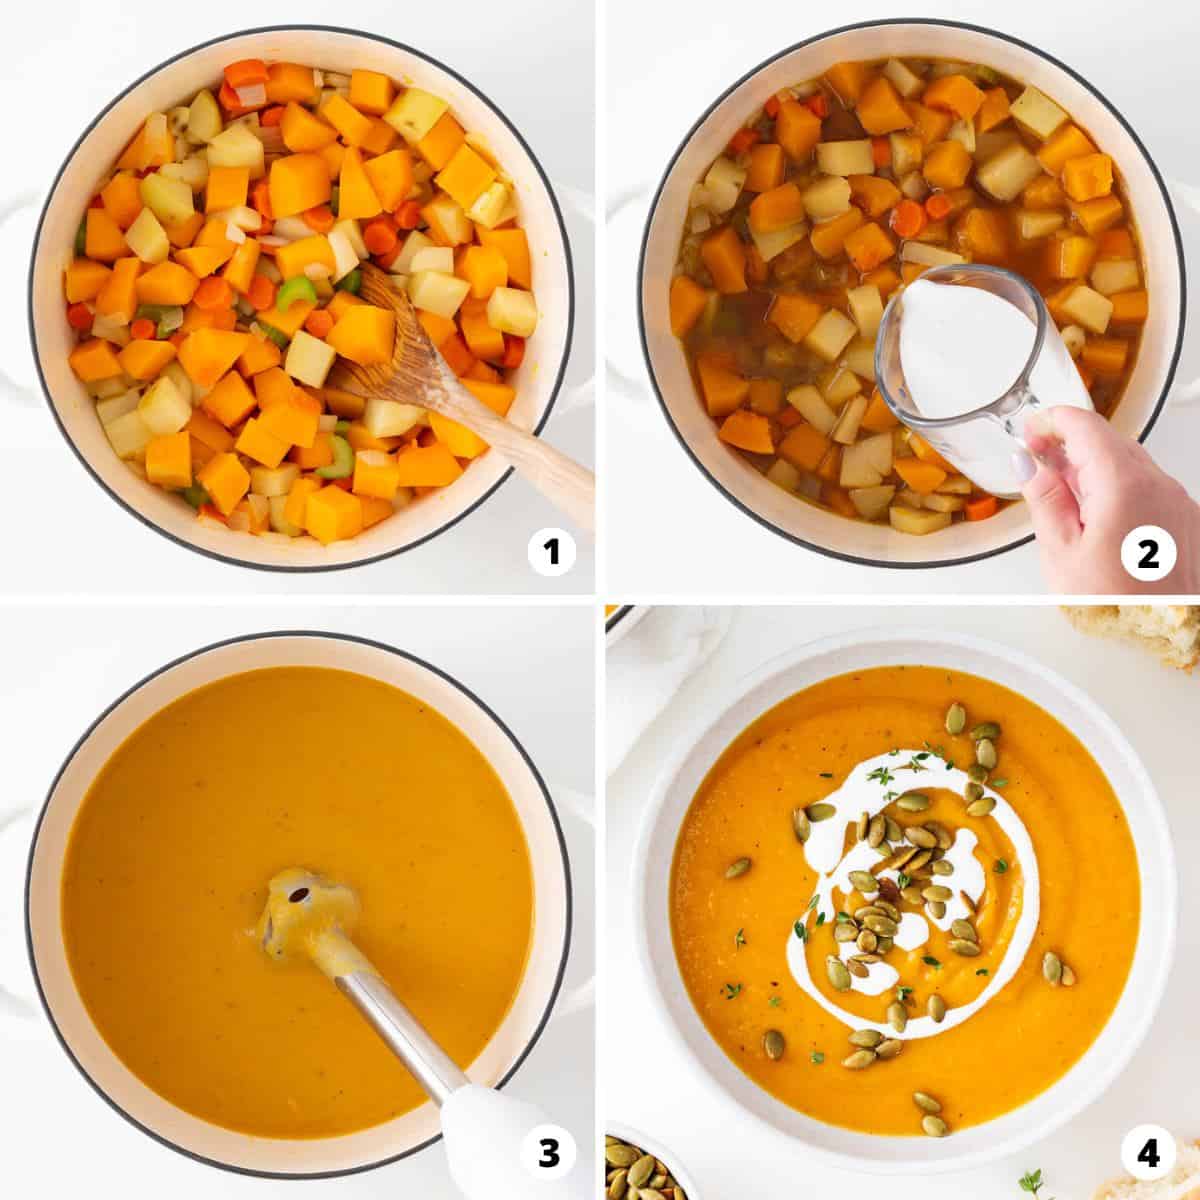 Showing how to make butternut squash soup in a 4 step collage.